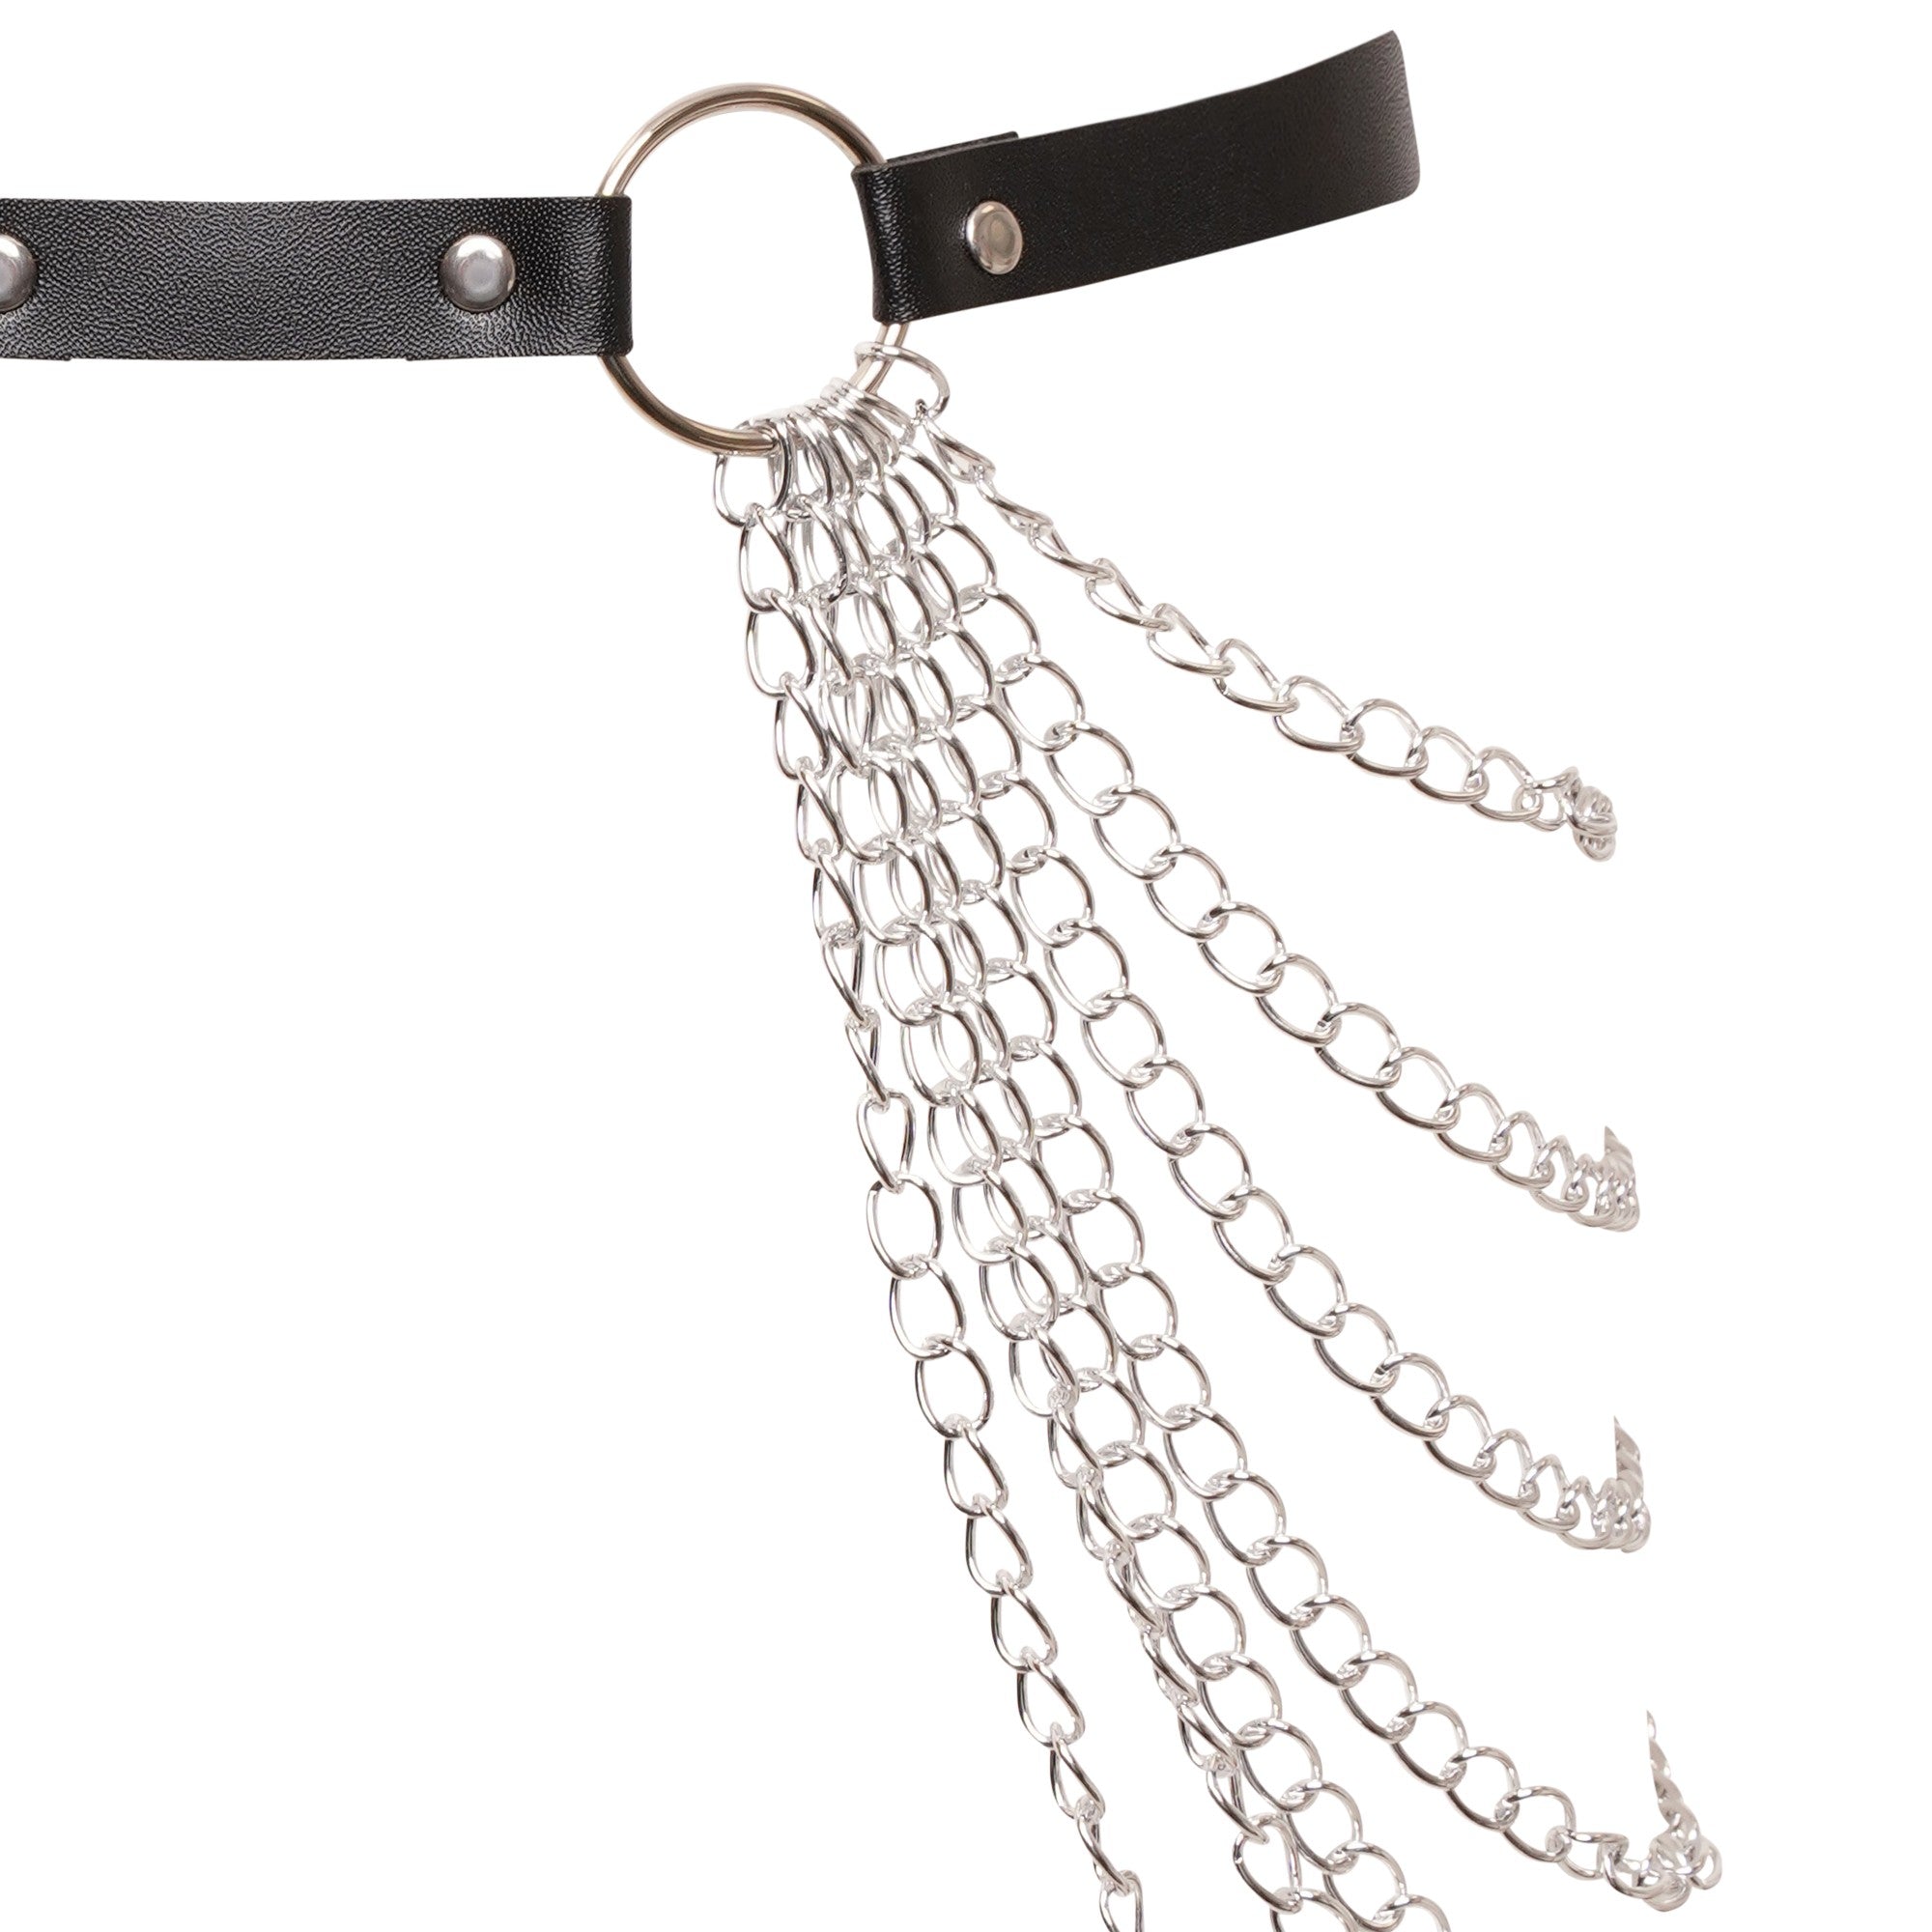 Ro Rox Rory Multiple Chain Faux Leather Belt